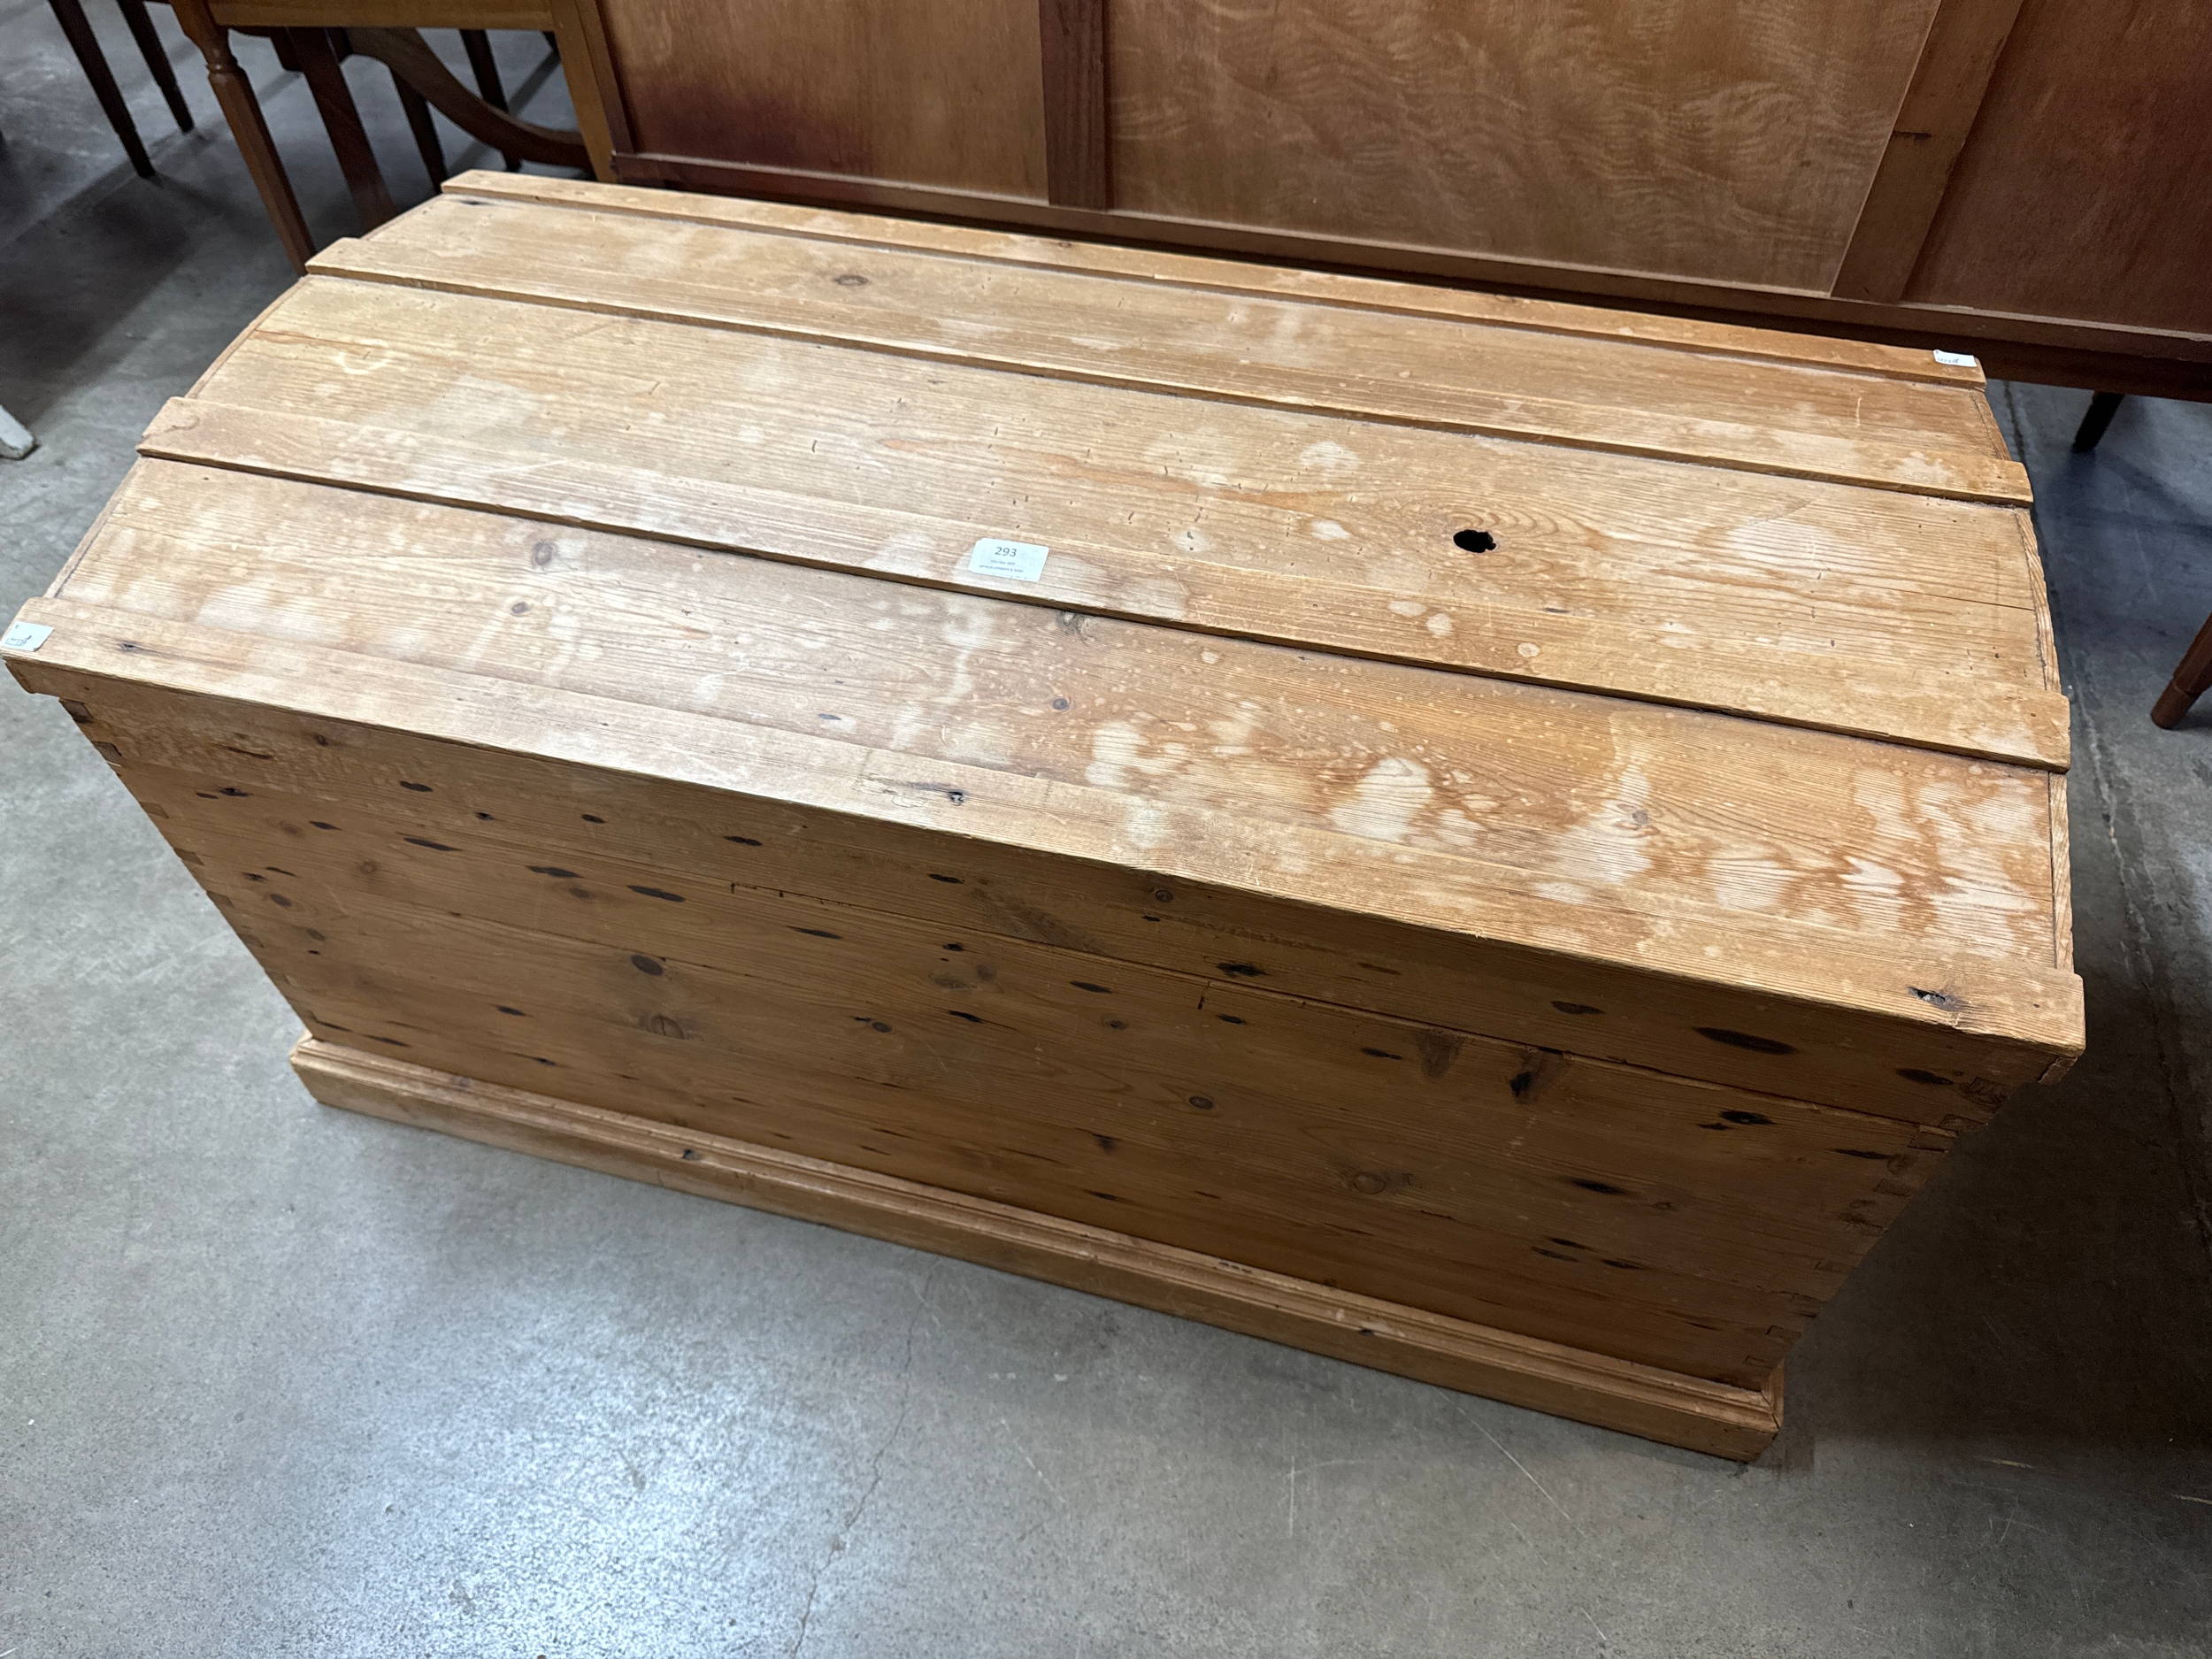 A pine dome top blanket box